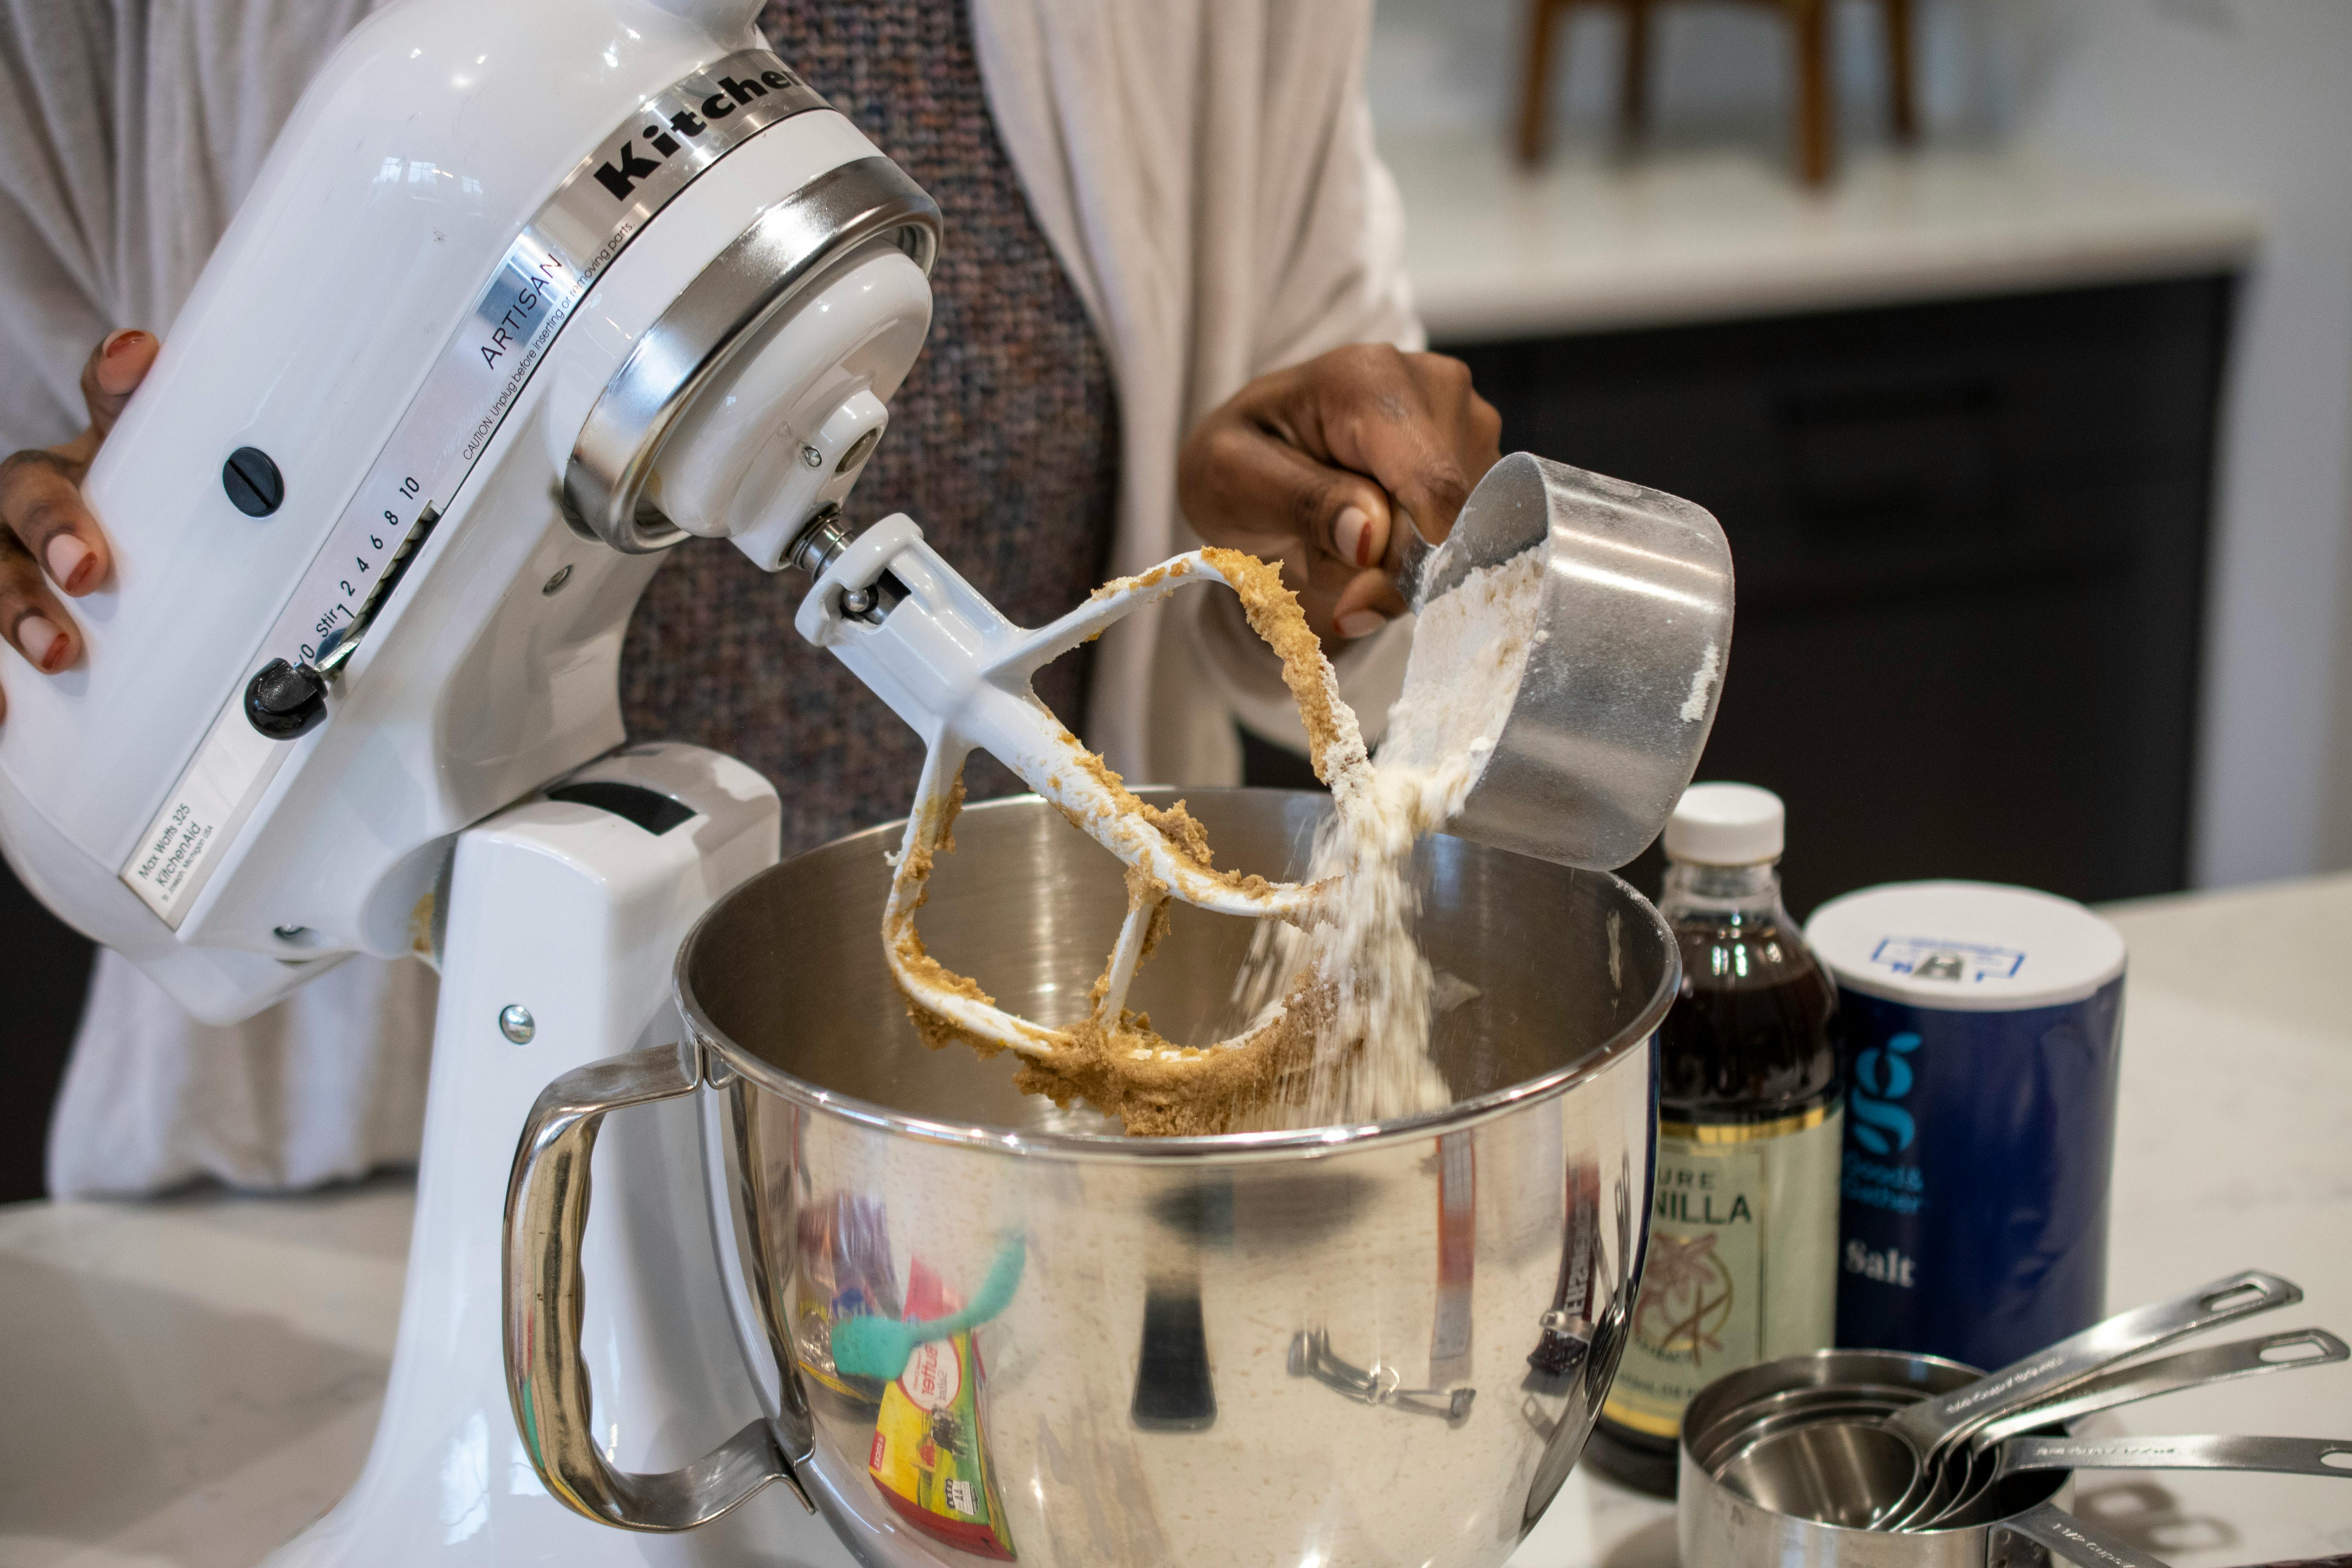 FAQ: How Do I Order Replacement Parts for My Stand Mixer? 